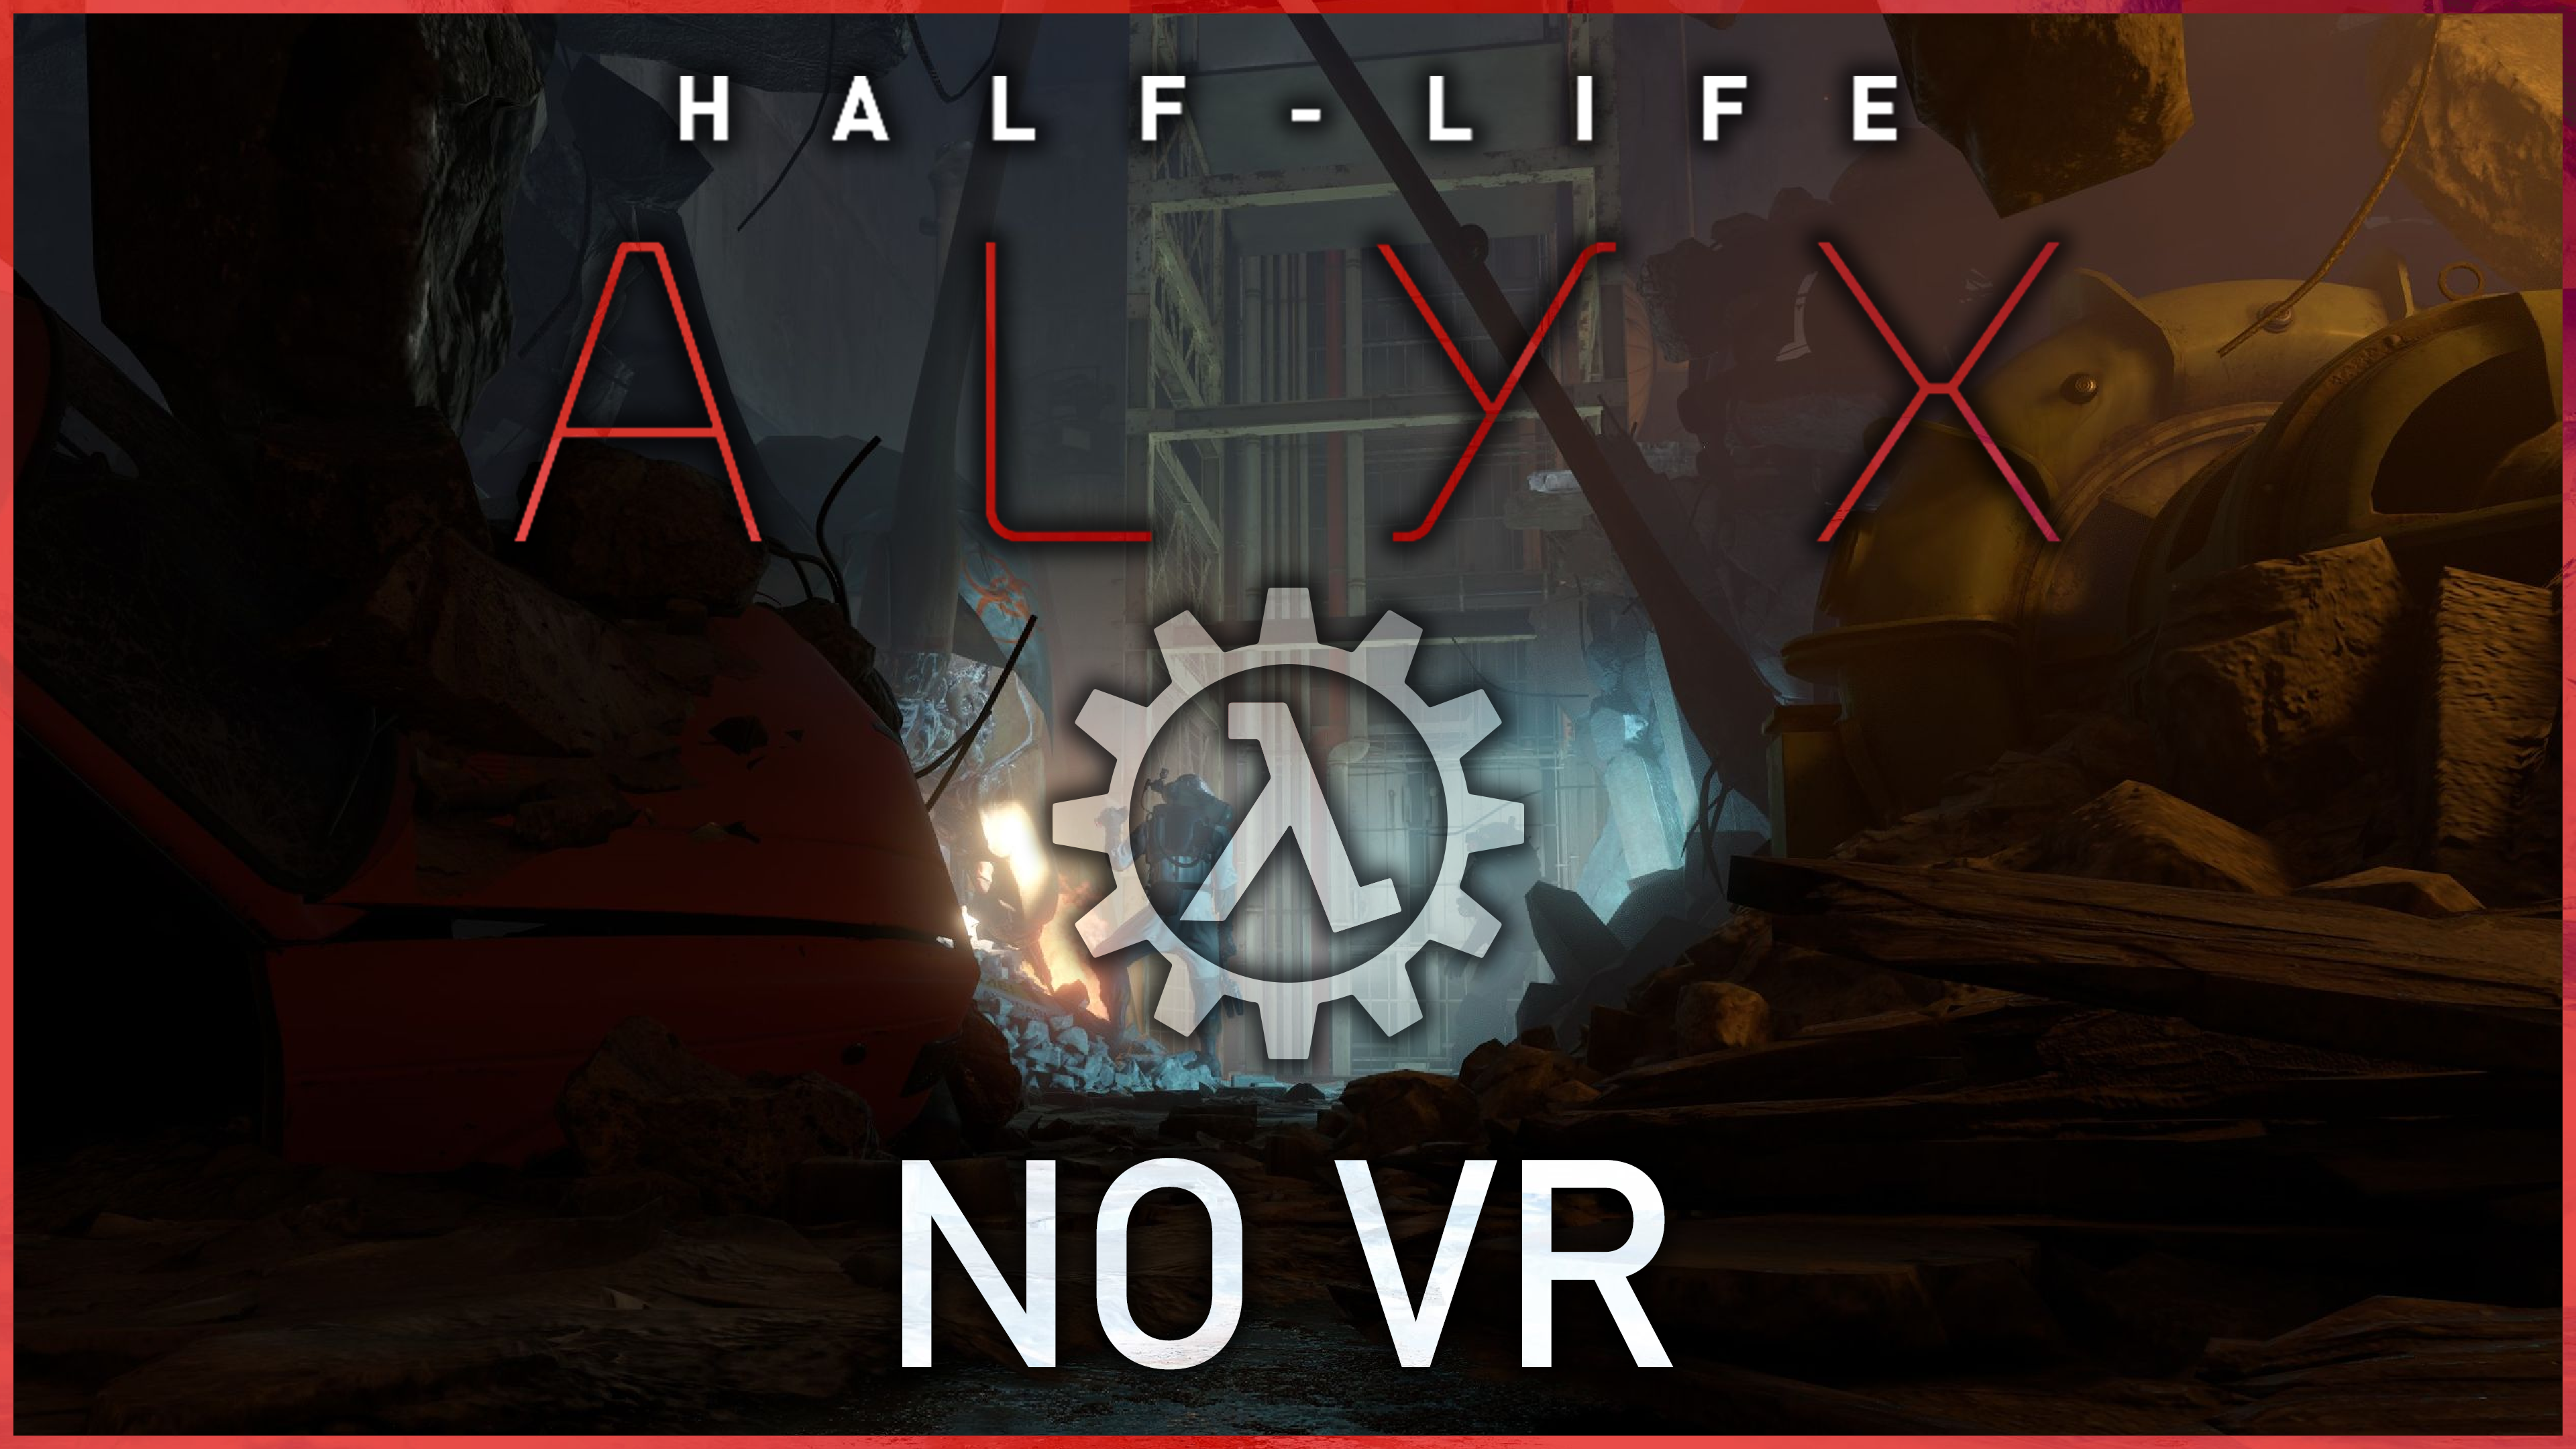 Half-Life Alyx: Levitation is an ambitious VR mod coming this year